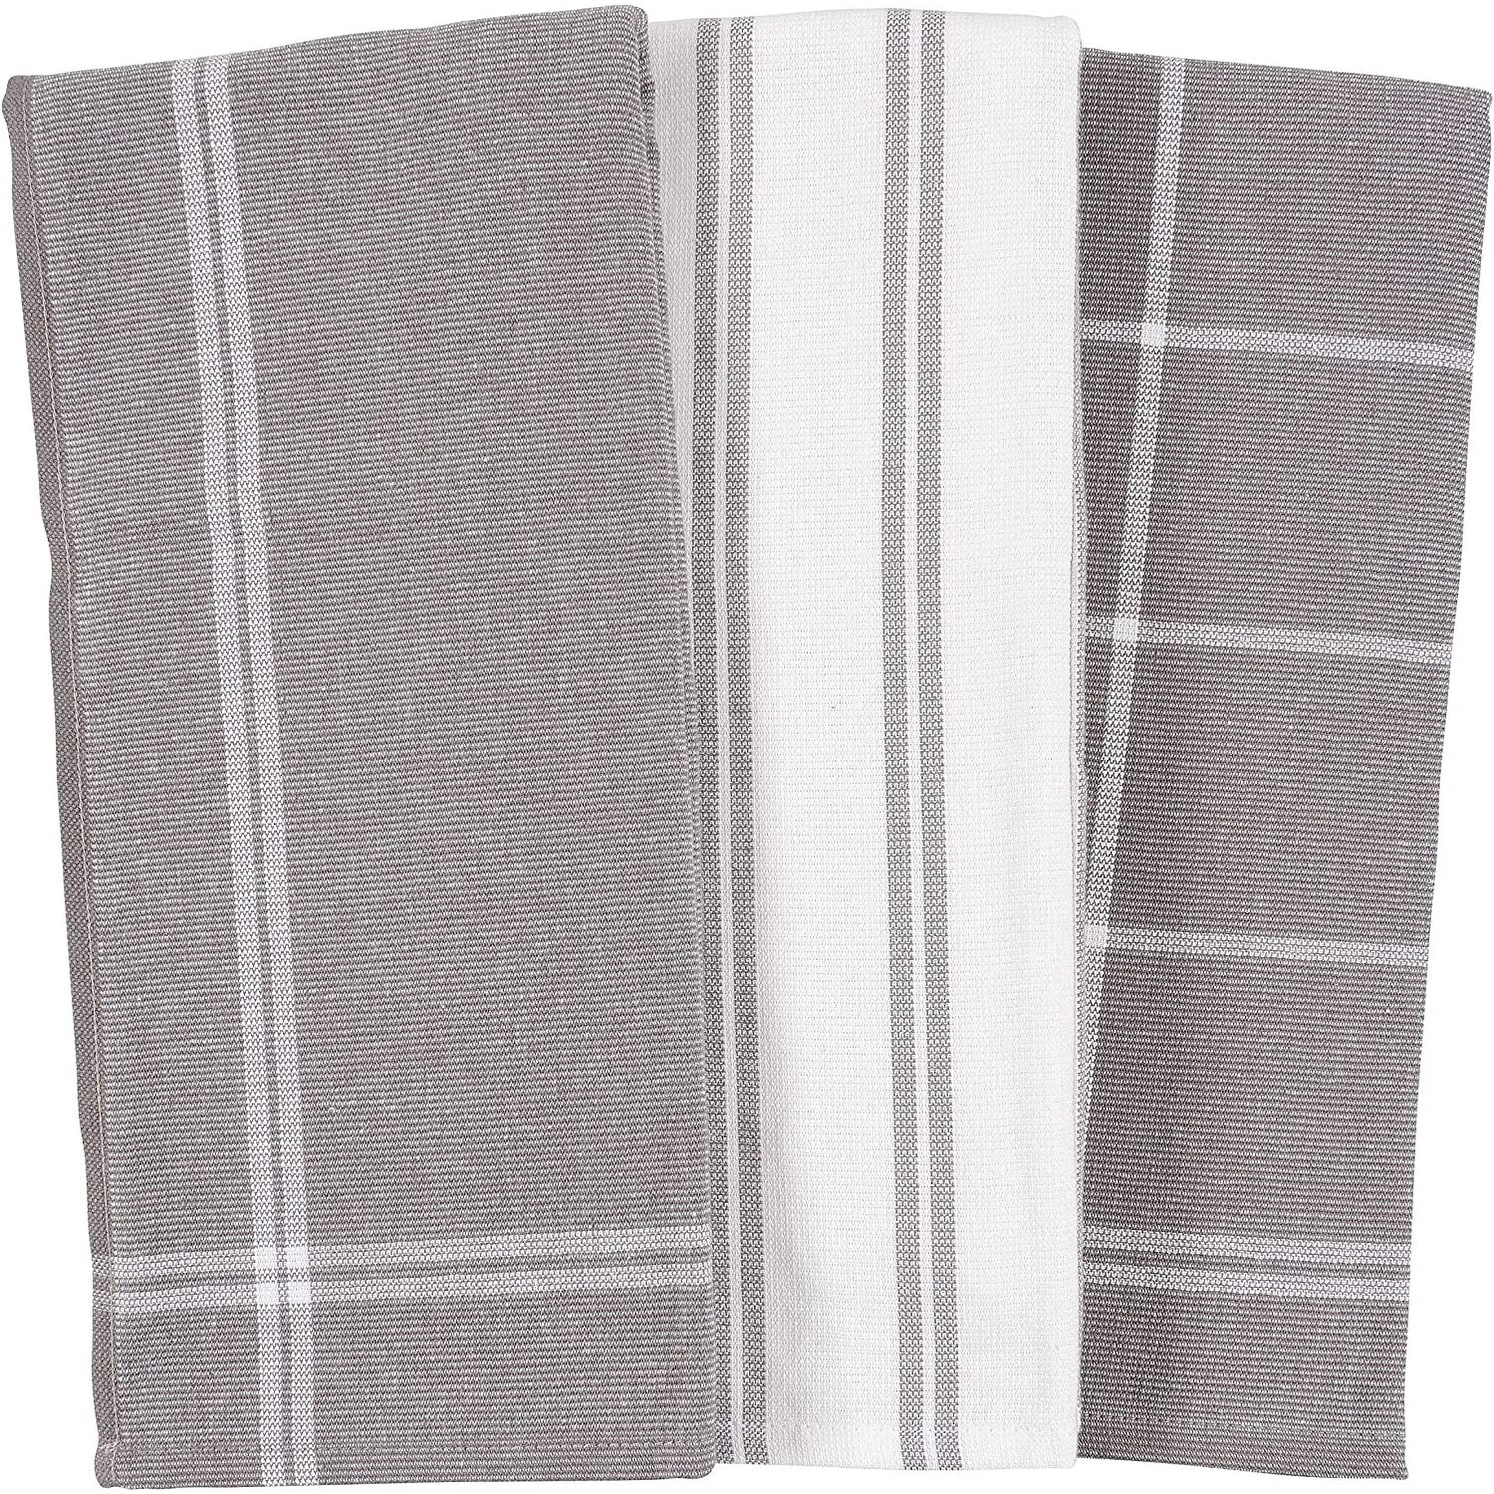 https://ak1.ostkcdn.com/images/products/is/images/direct/c87e31c7e514f7e360fad82679ed68cd030f544f/KAF-Home-Canopy-Lane-Turkish-Kitchen-Towels%2C-Set-of-3.jpg